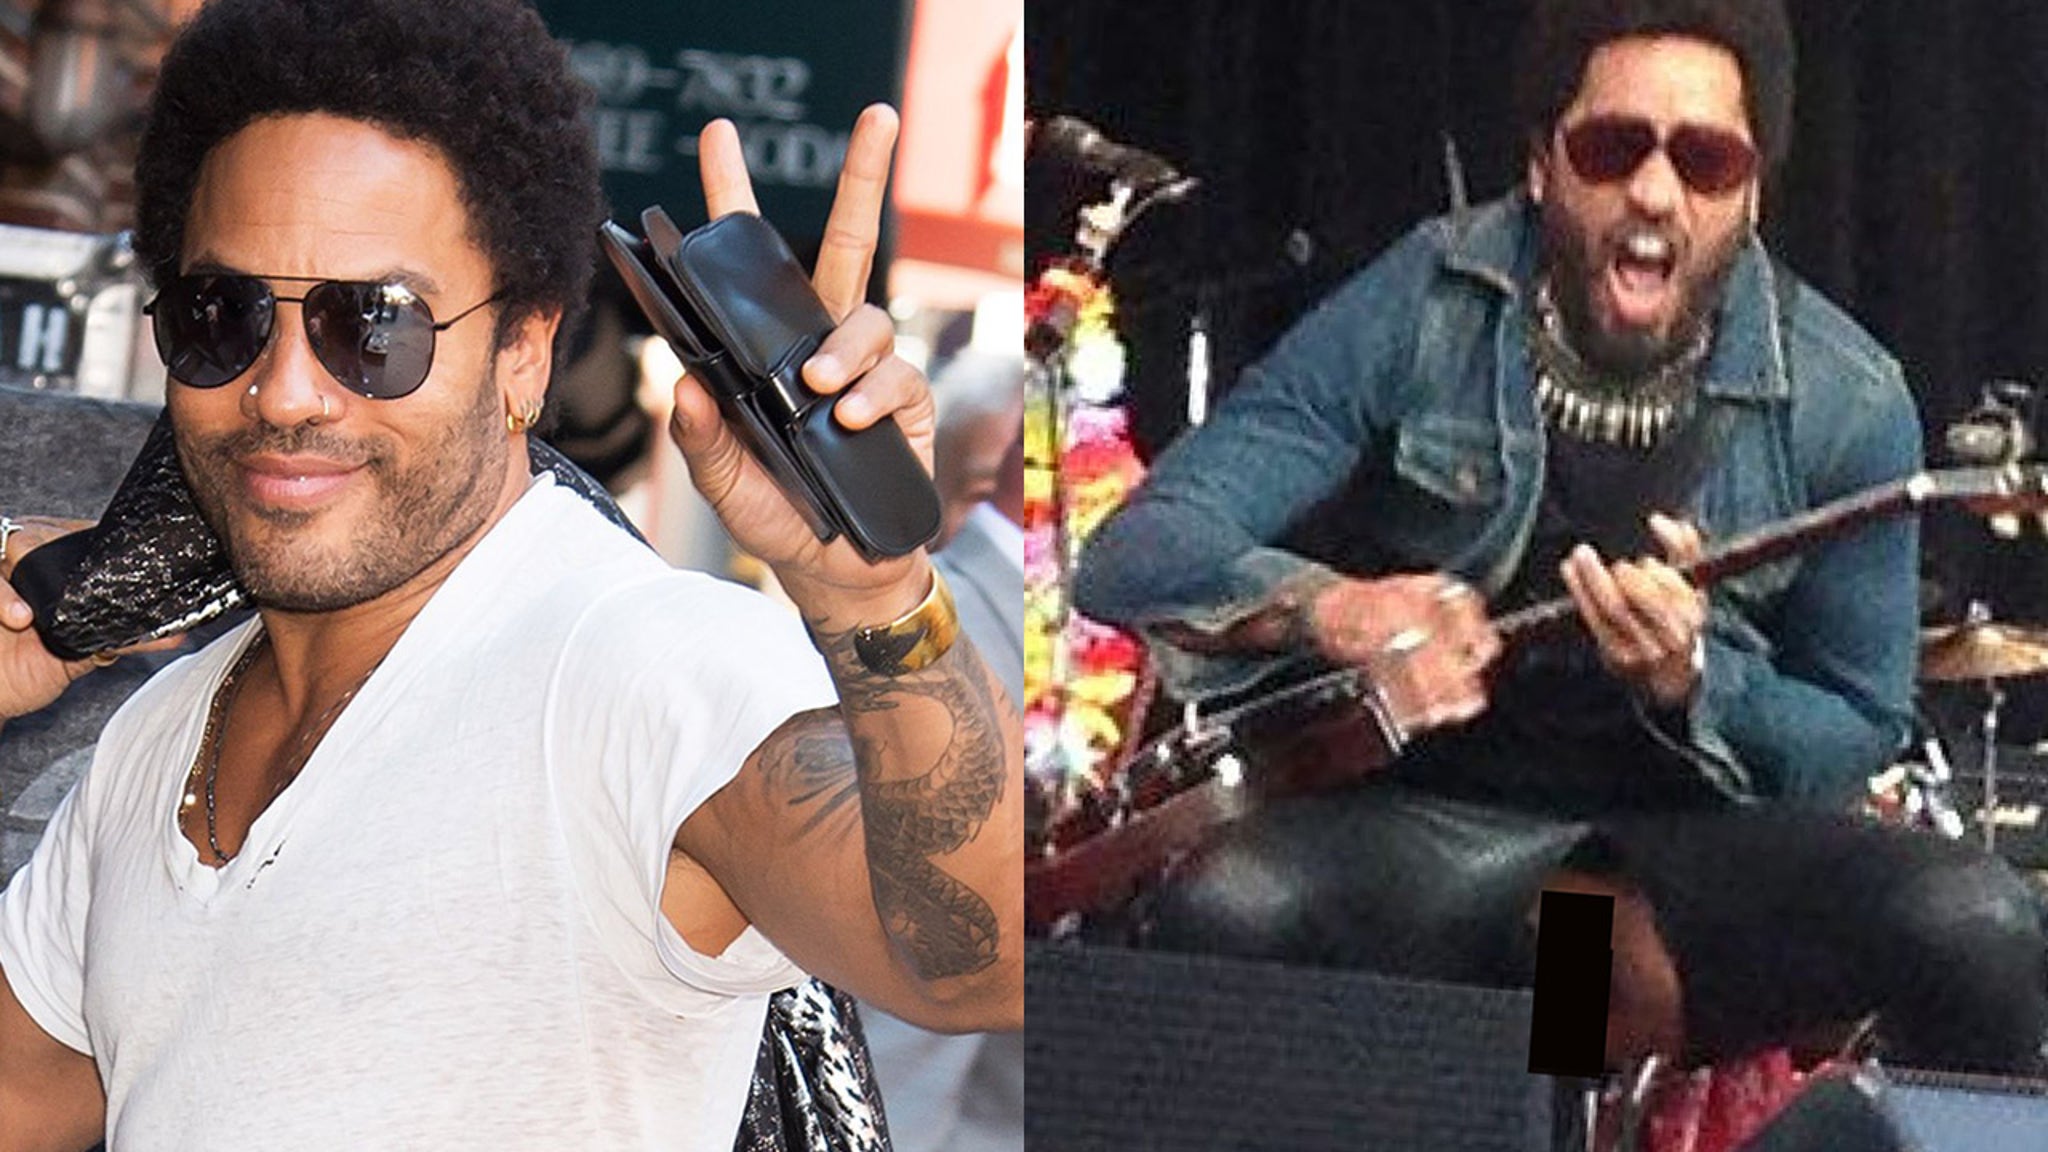 Lenny Kravitz Exposes Junk After Leather Pants Rip Open!!! 